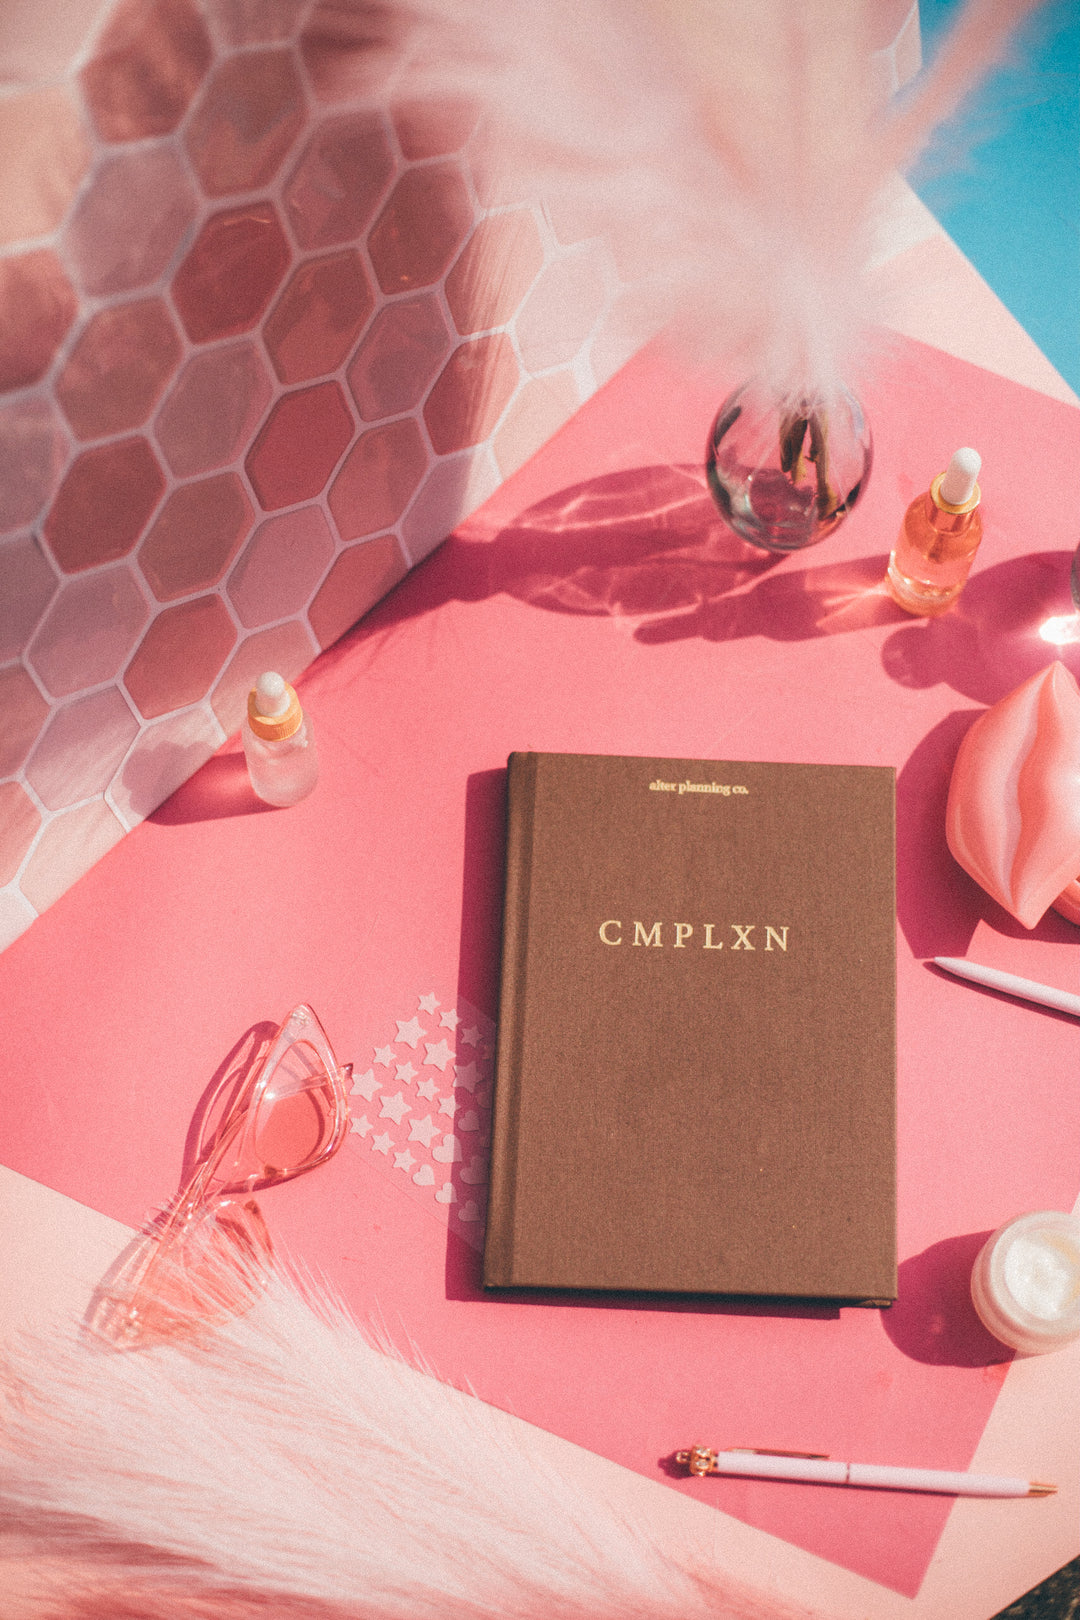 Graphic that reads "Announcing CMPLXN" (alter planning co's newest product; a skin care journal) Graphic also features illustrations of women in face masks and skin care products.